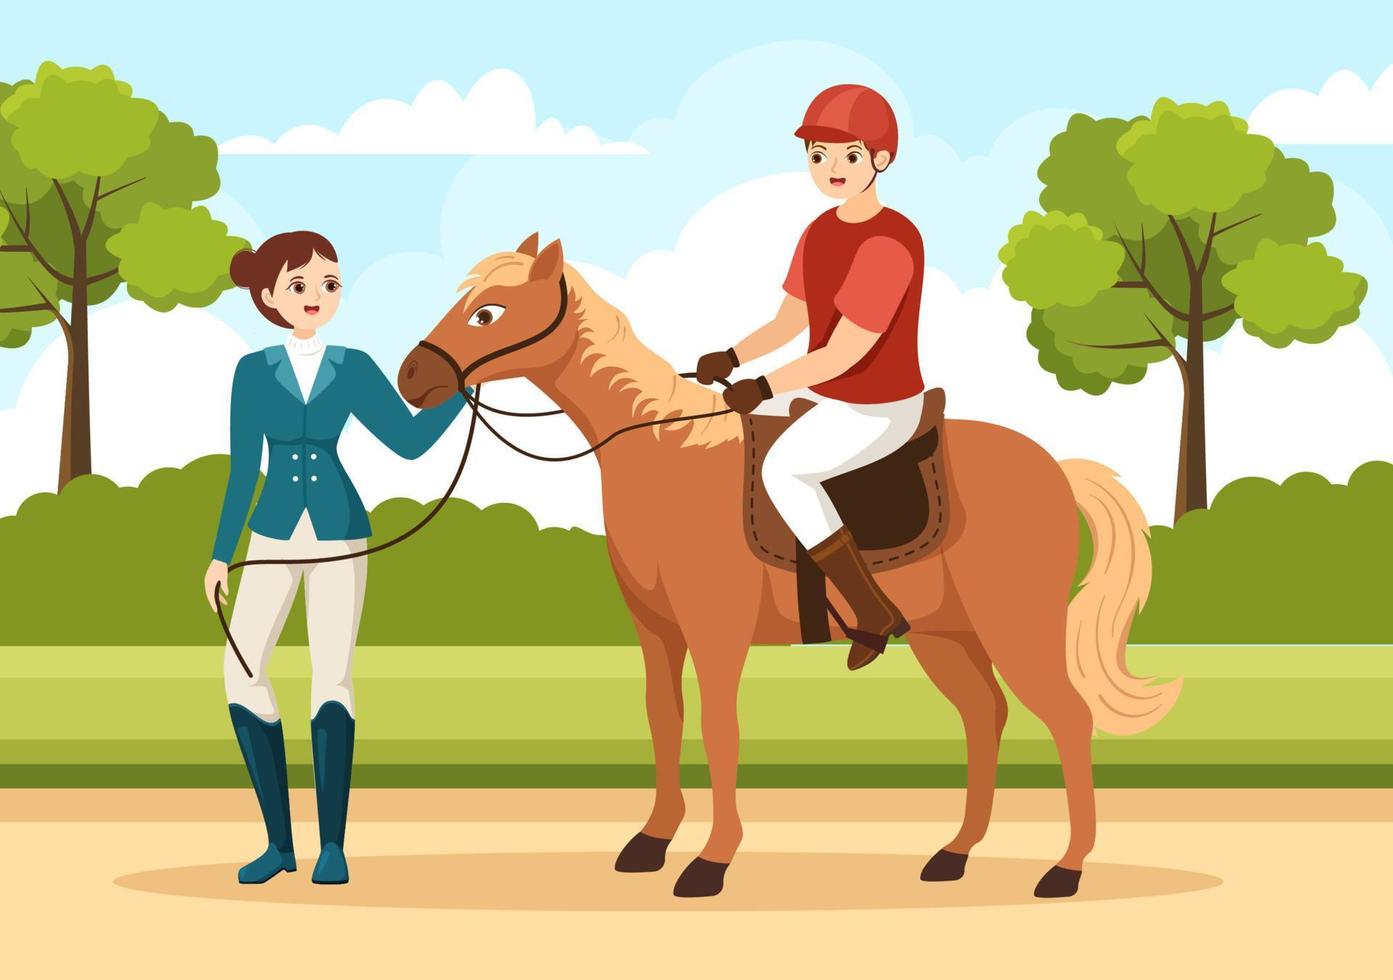 Equestrian Sport Horse Trainer with Training, Riding Lessons and Running Horses in Flat Cartoon Hand Drawn Template Illustration vector